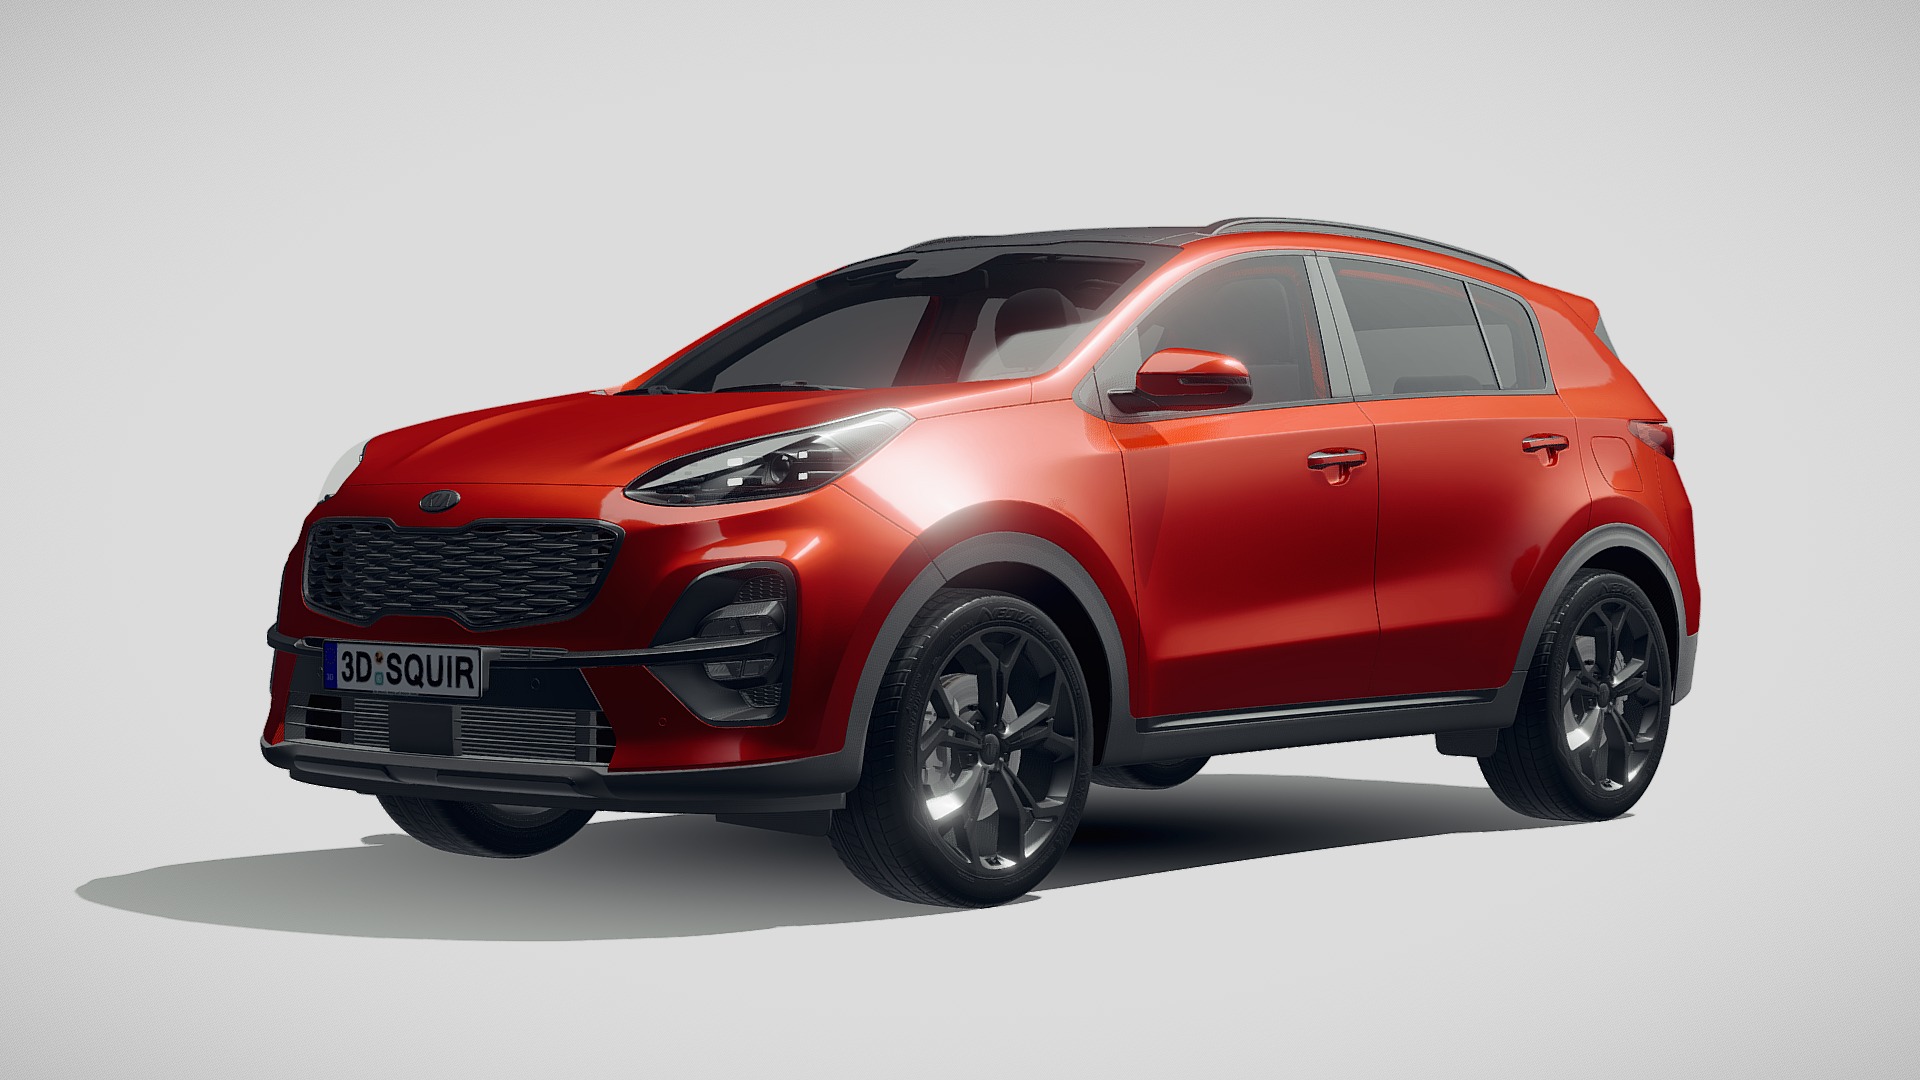 3D model Kia Sportage interior 2019 - This is a 3D model of the Kia Sportage interior 2019. The 3D model is about a red car with a white background.